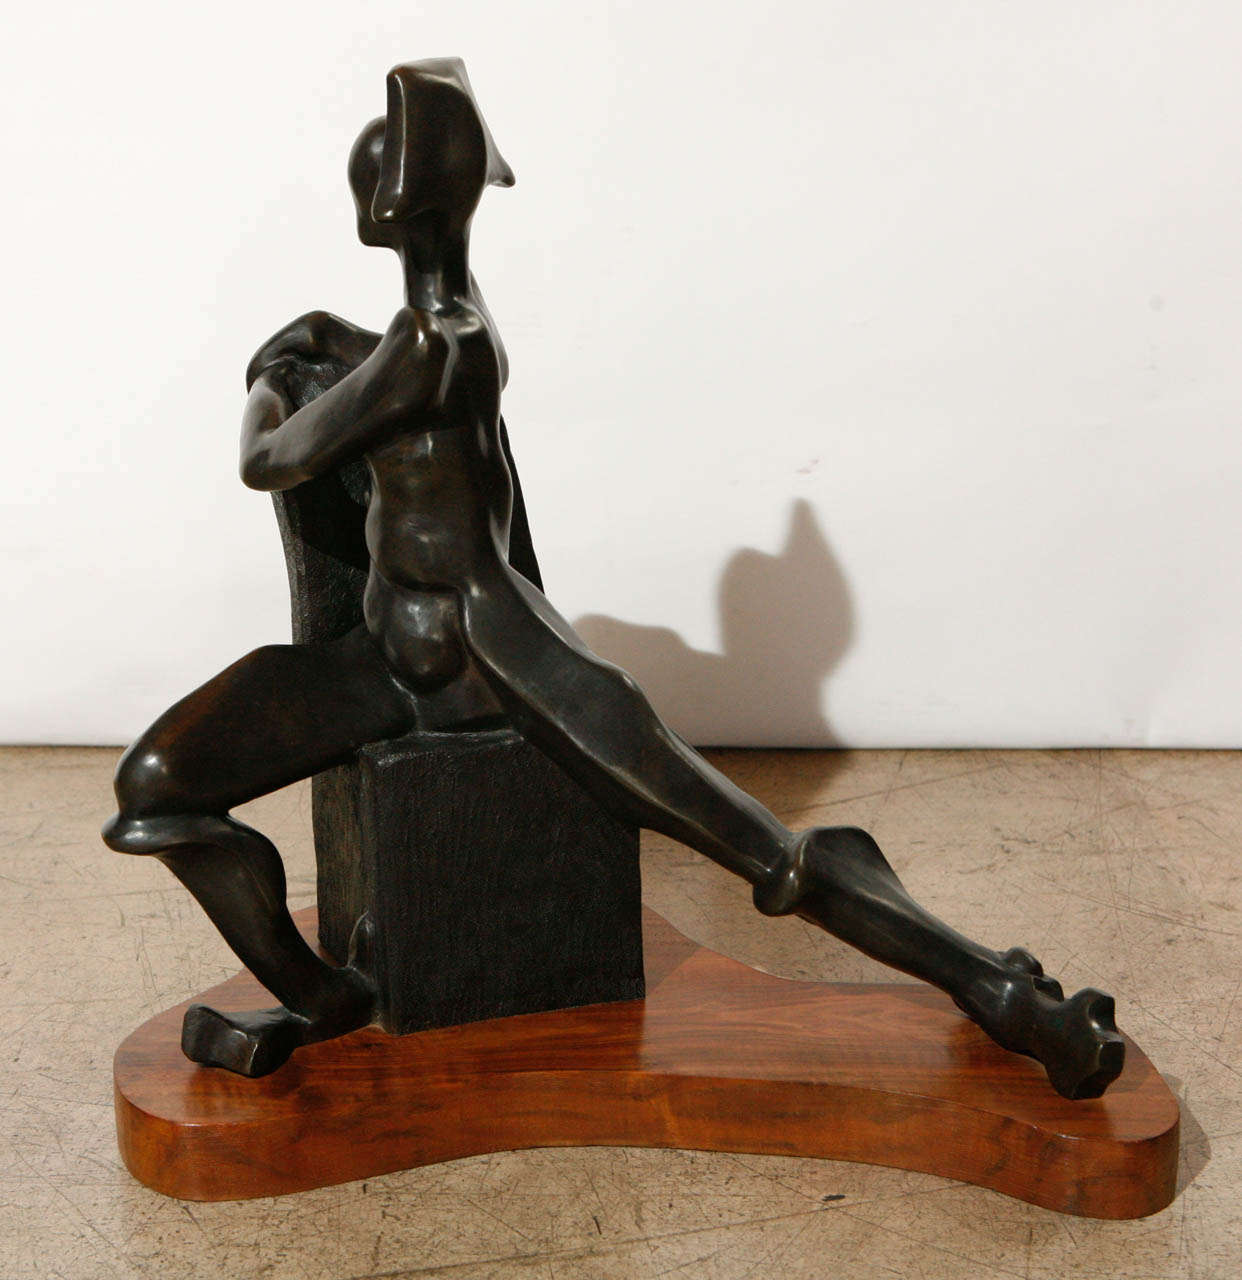 A spectacular bronze sculpture by Sy Rosenwasser entitled Valiant woman. Signed, numbered 1/15 and dated 1977. Bronze is mounted on a thick piece of walnut with beautiful graining.

Sy Rosenwasser's work may be viewed in many public and private